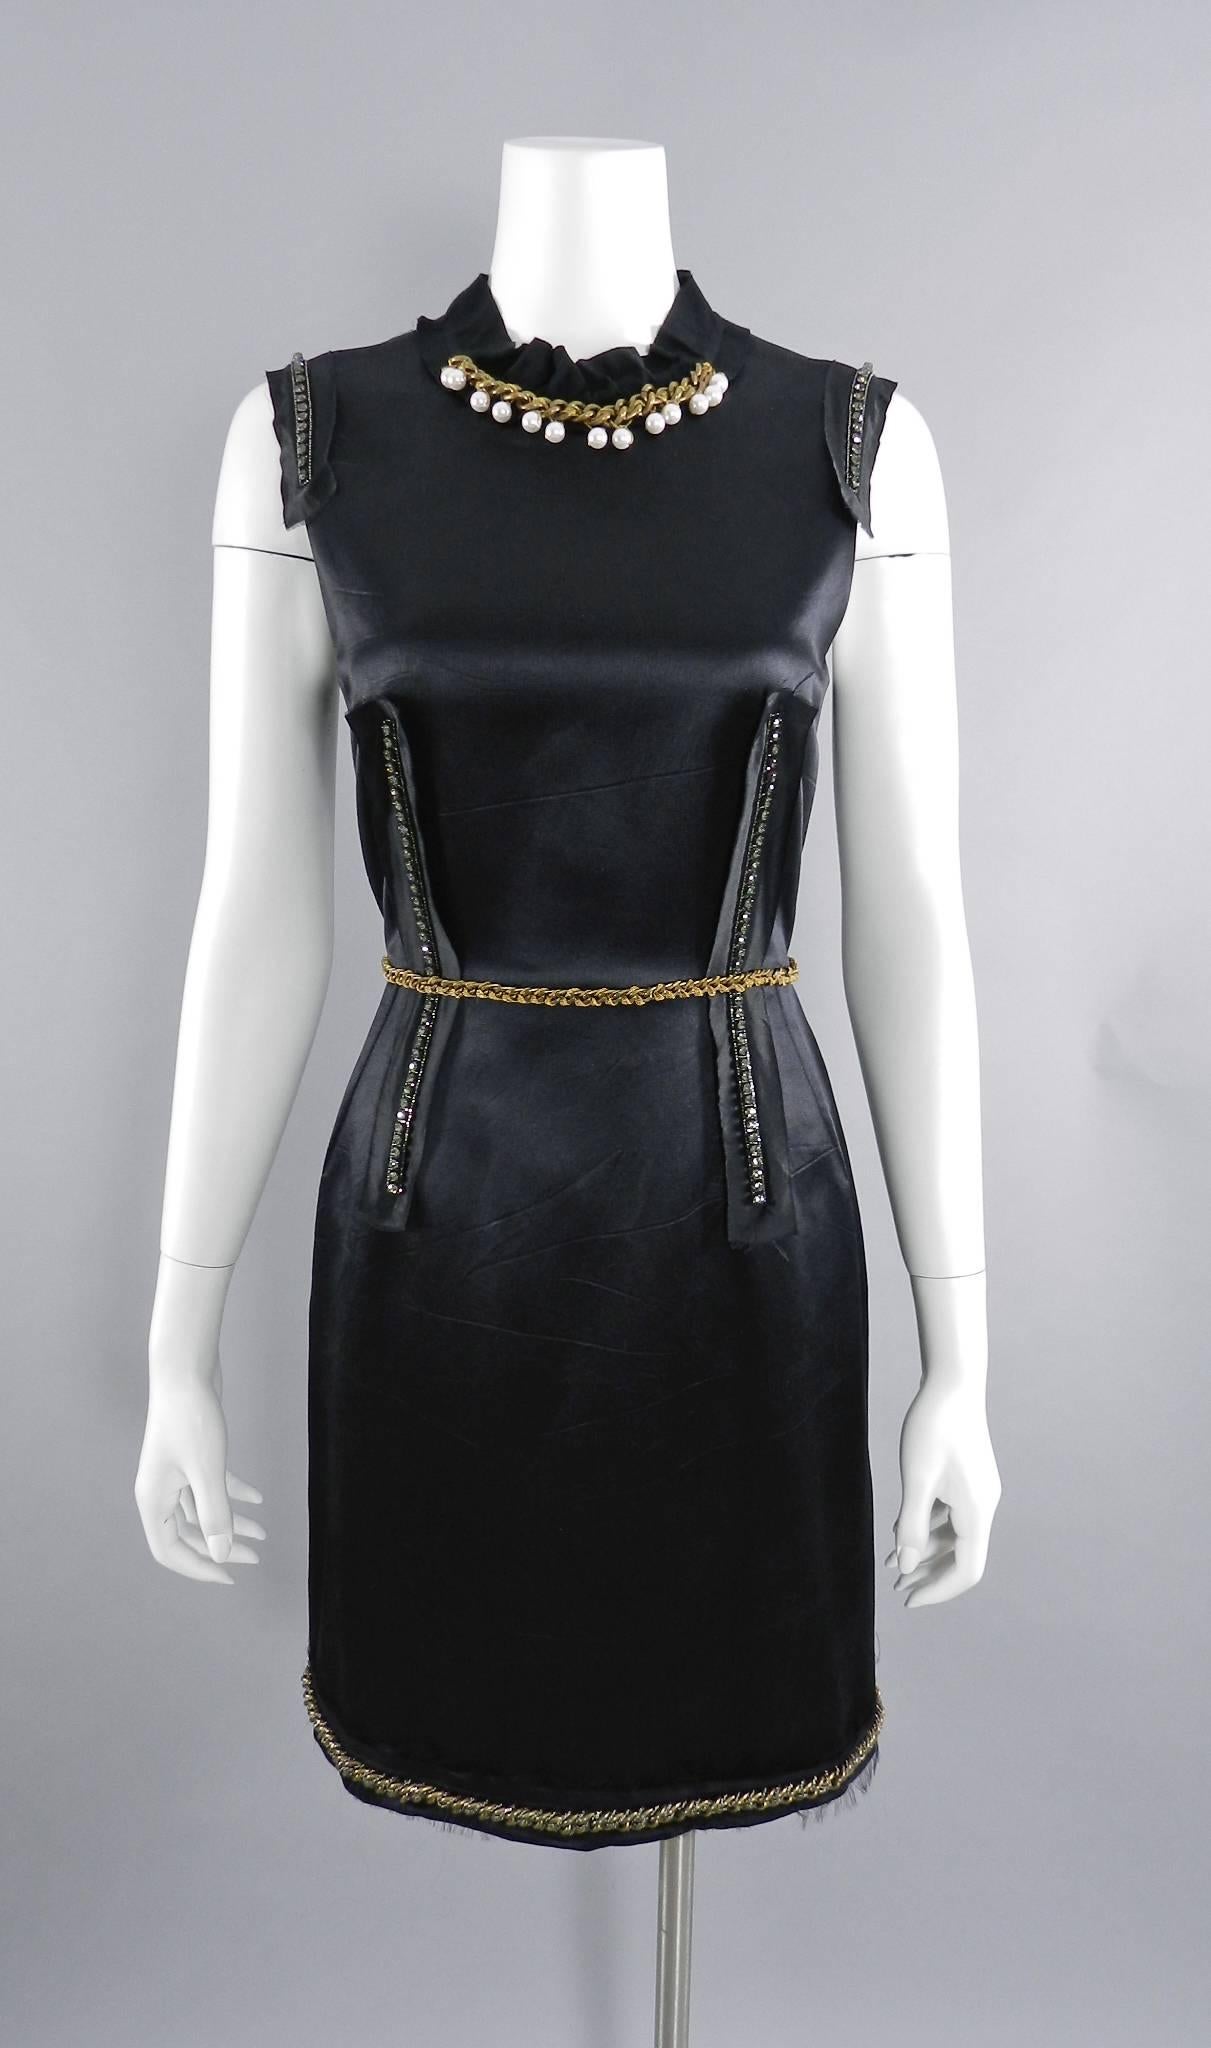 Lanvin Black Satin Cocktail Dress with Pearls and Chains 4